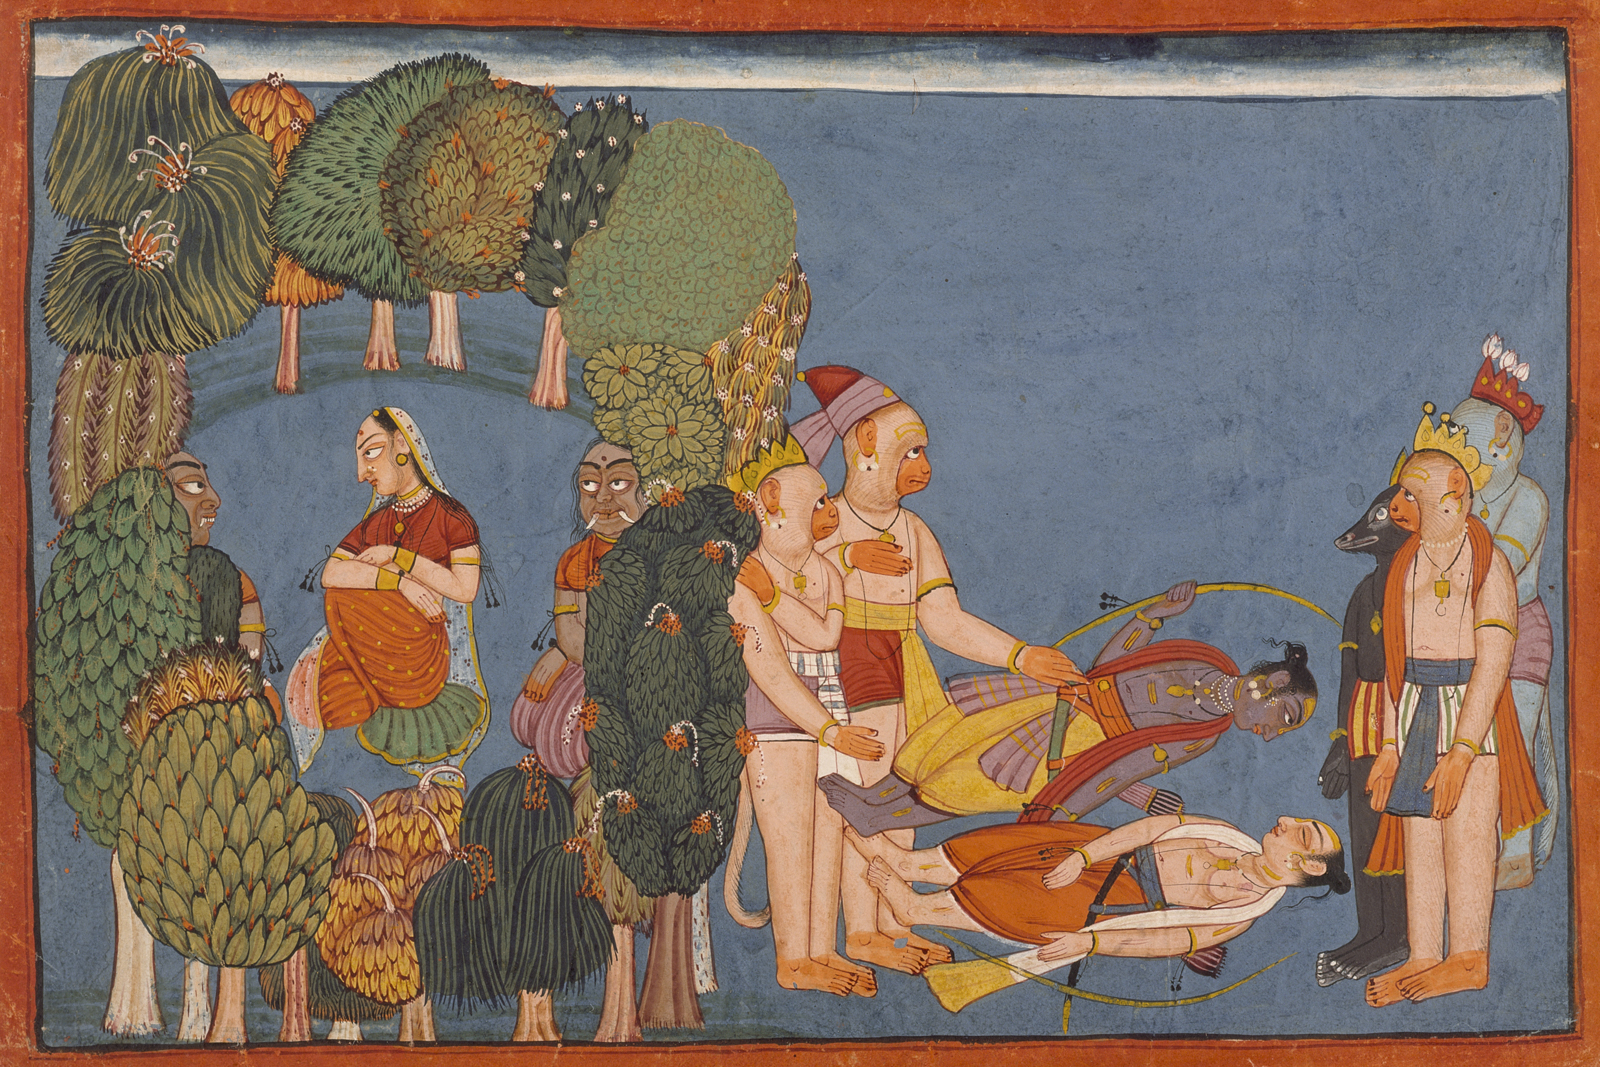 Painting from the “Shangri” Ramayana